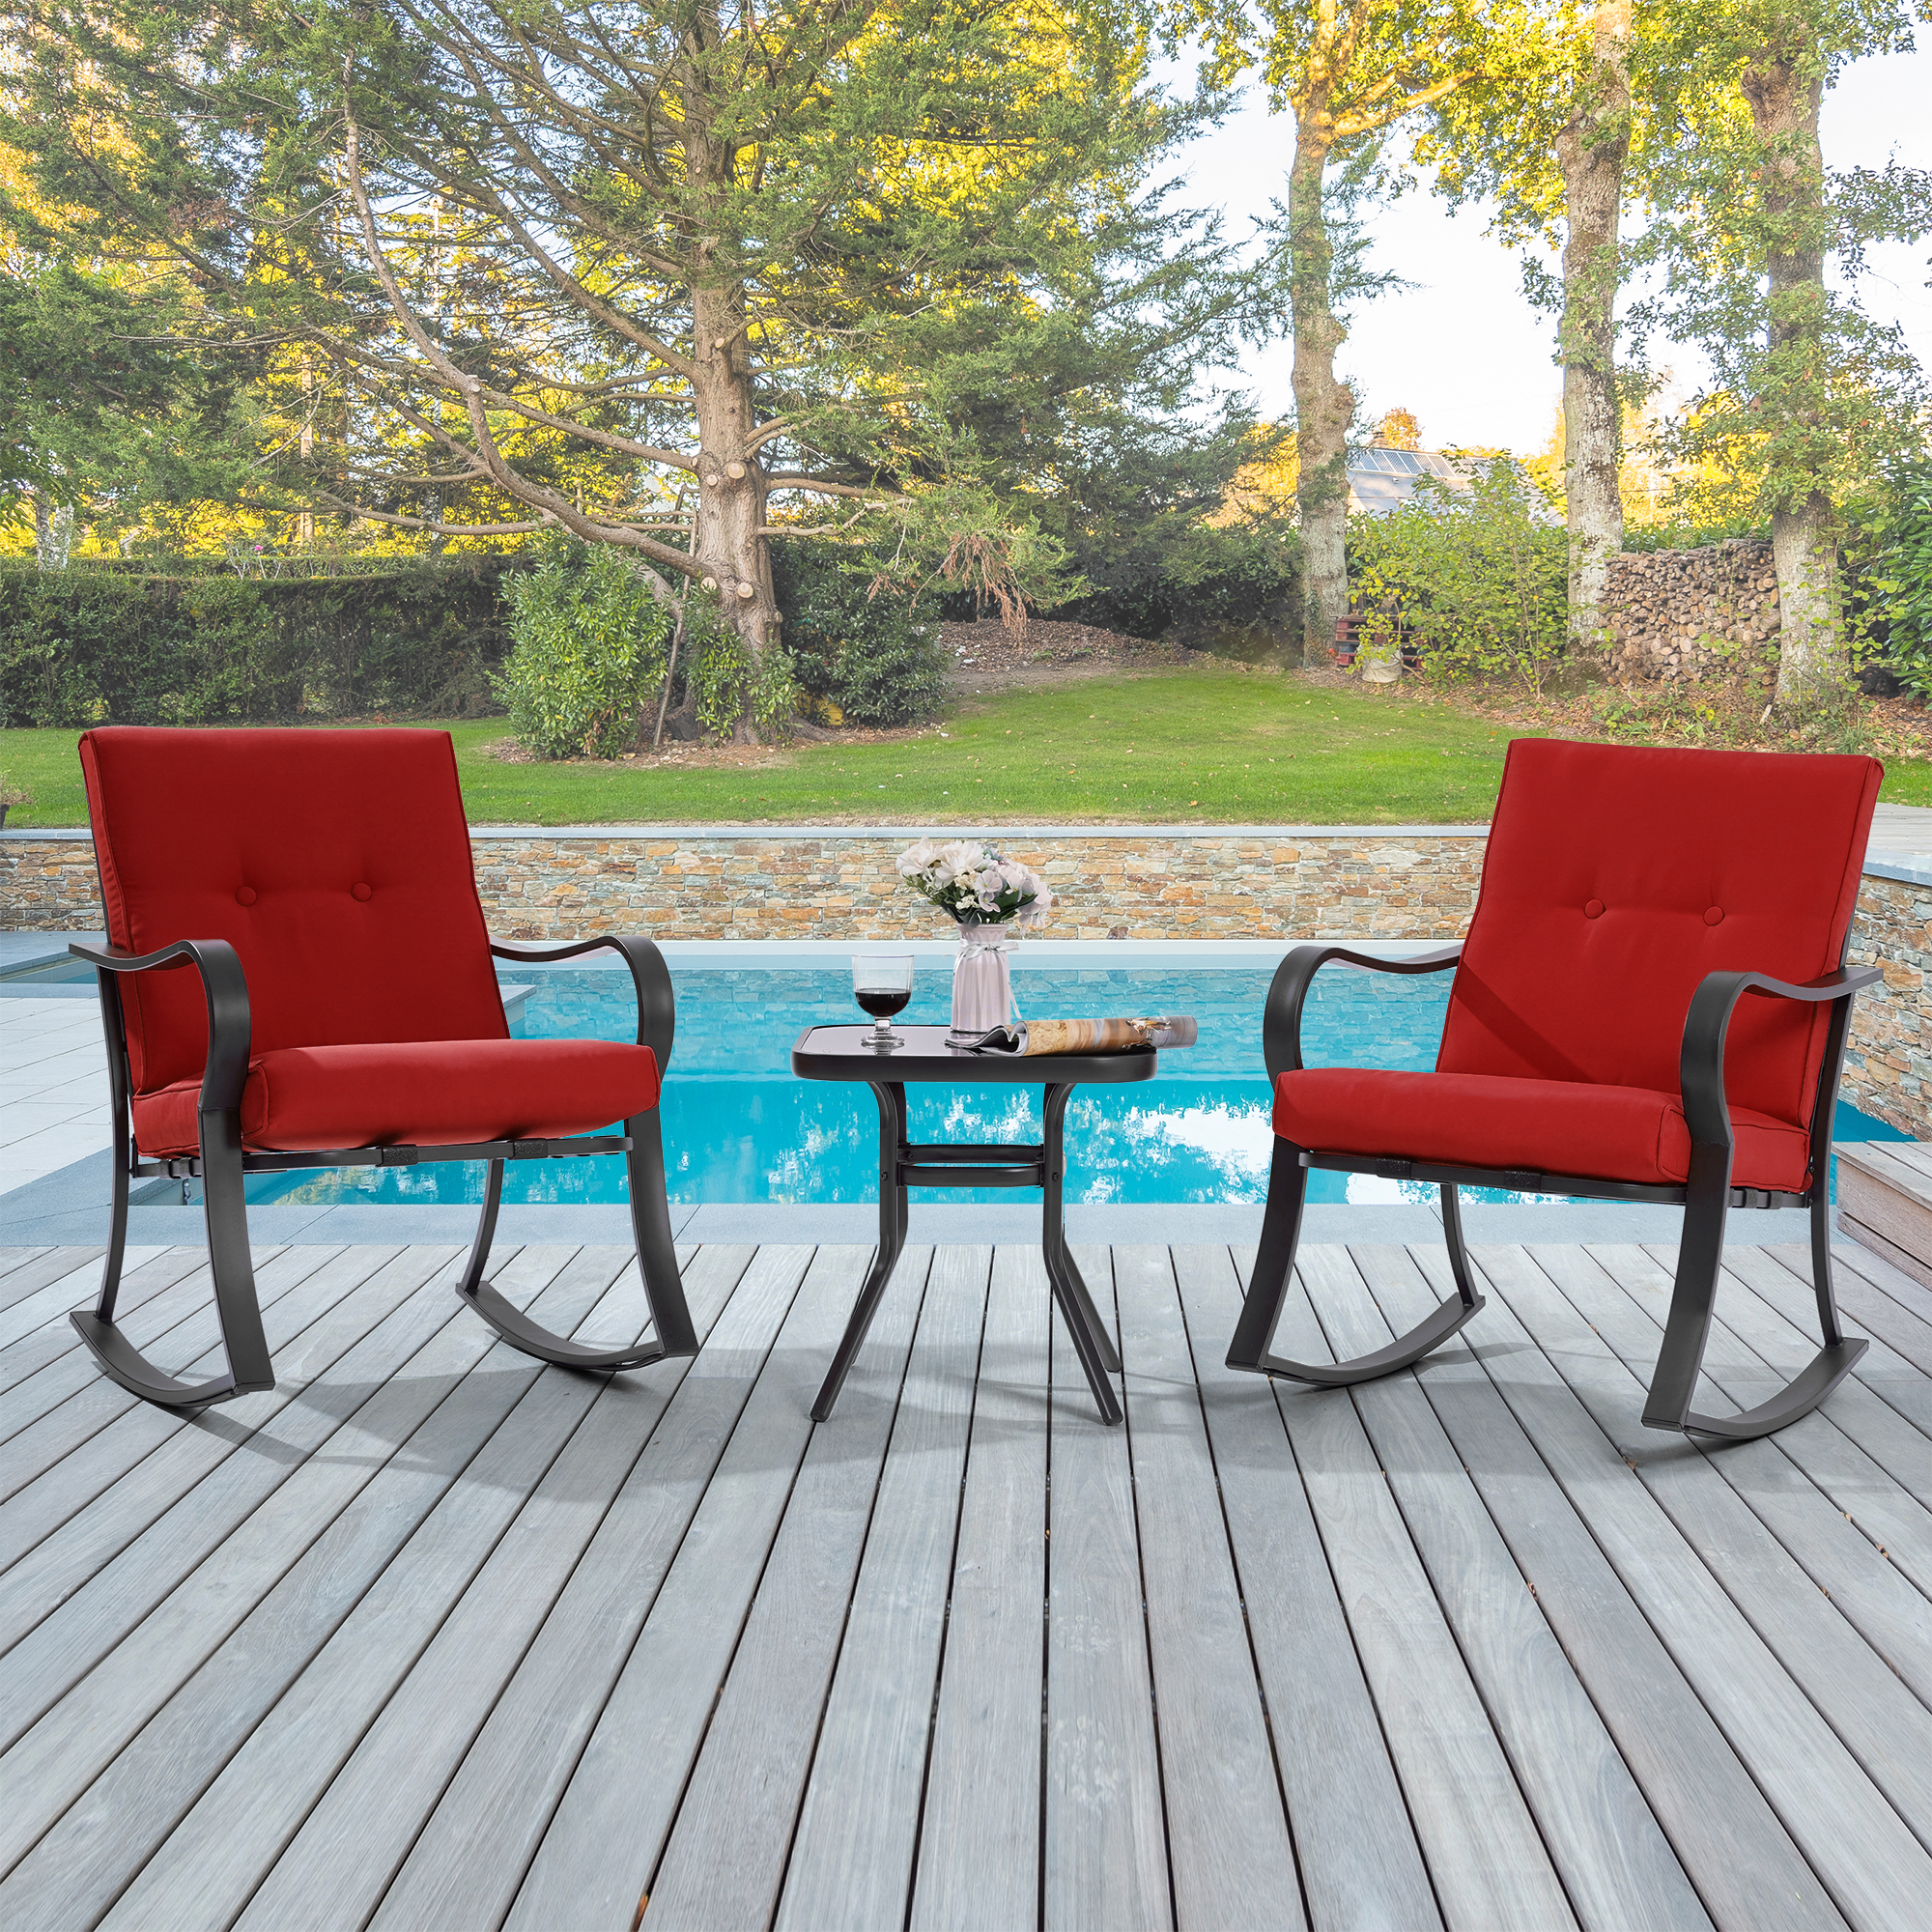 Outdoor Lounge Chair Courtyard Rocking Chair 3-Piece Steel Frame Outdoor Furniture Sets Thick Cushion Red Double Armchair Deck Backyard Bistro Set - image 1 of 8